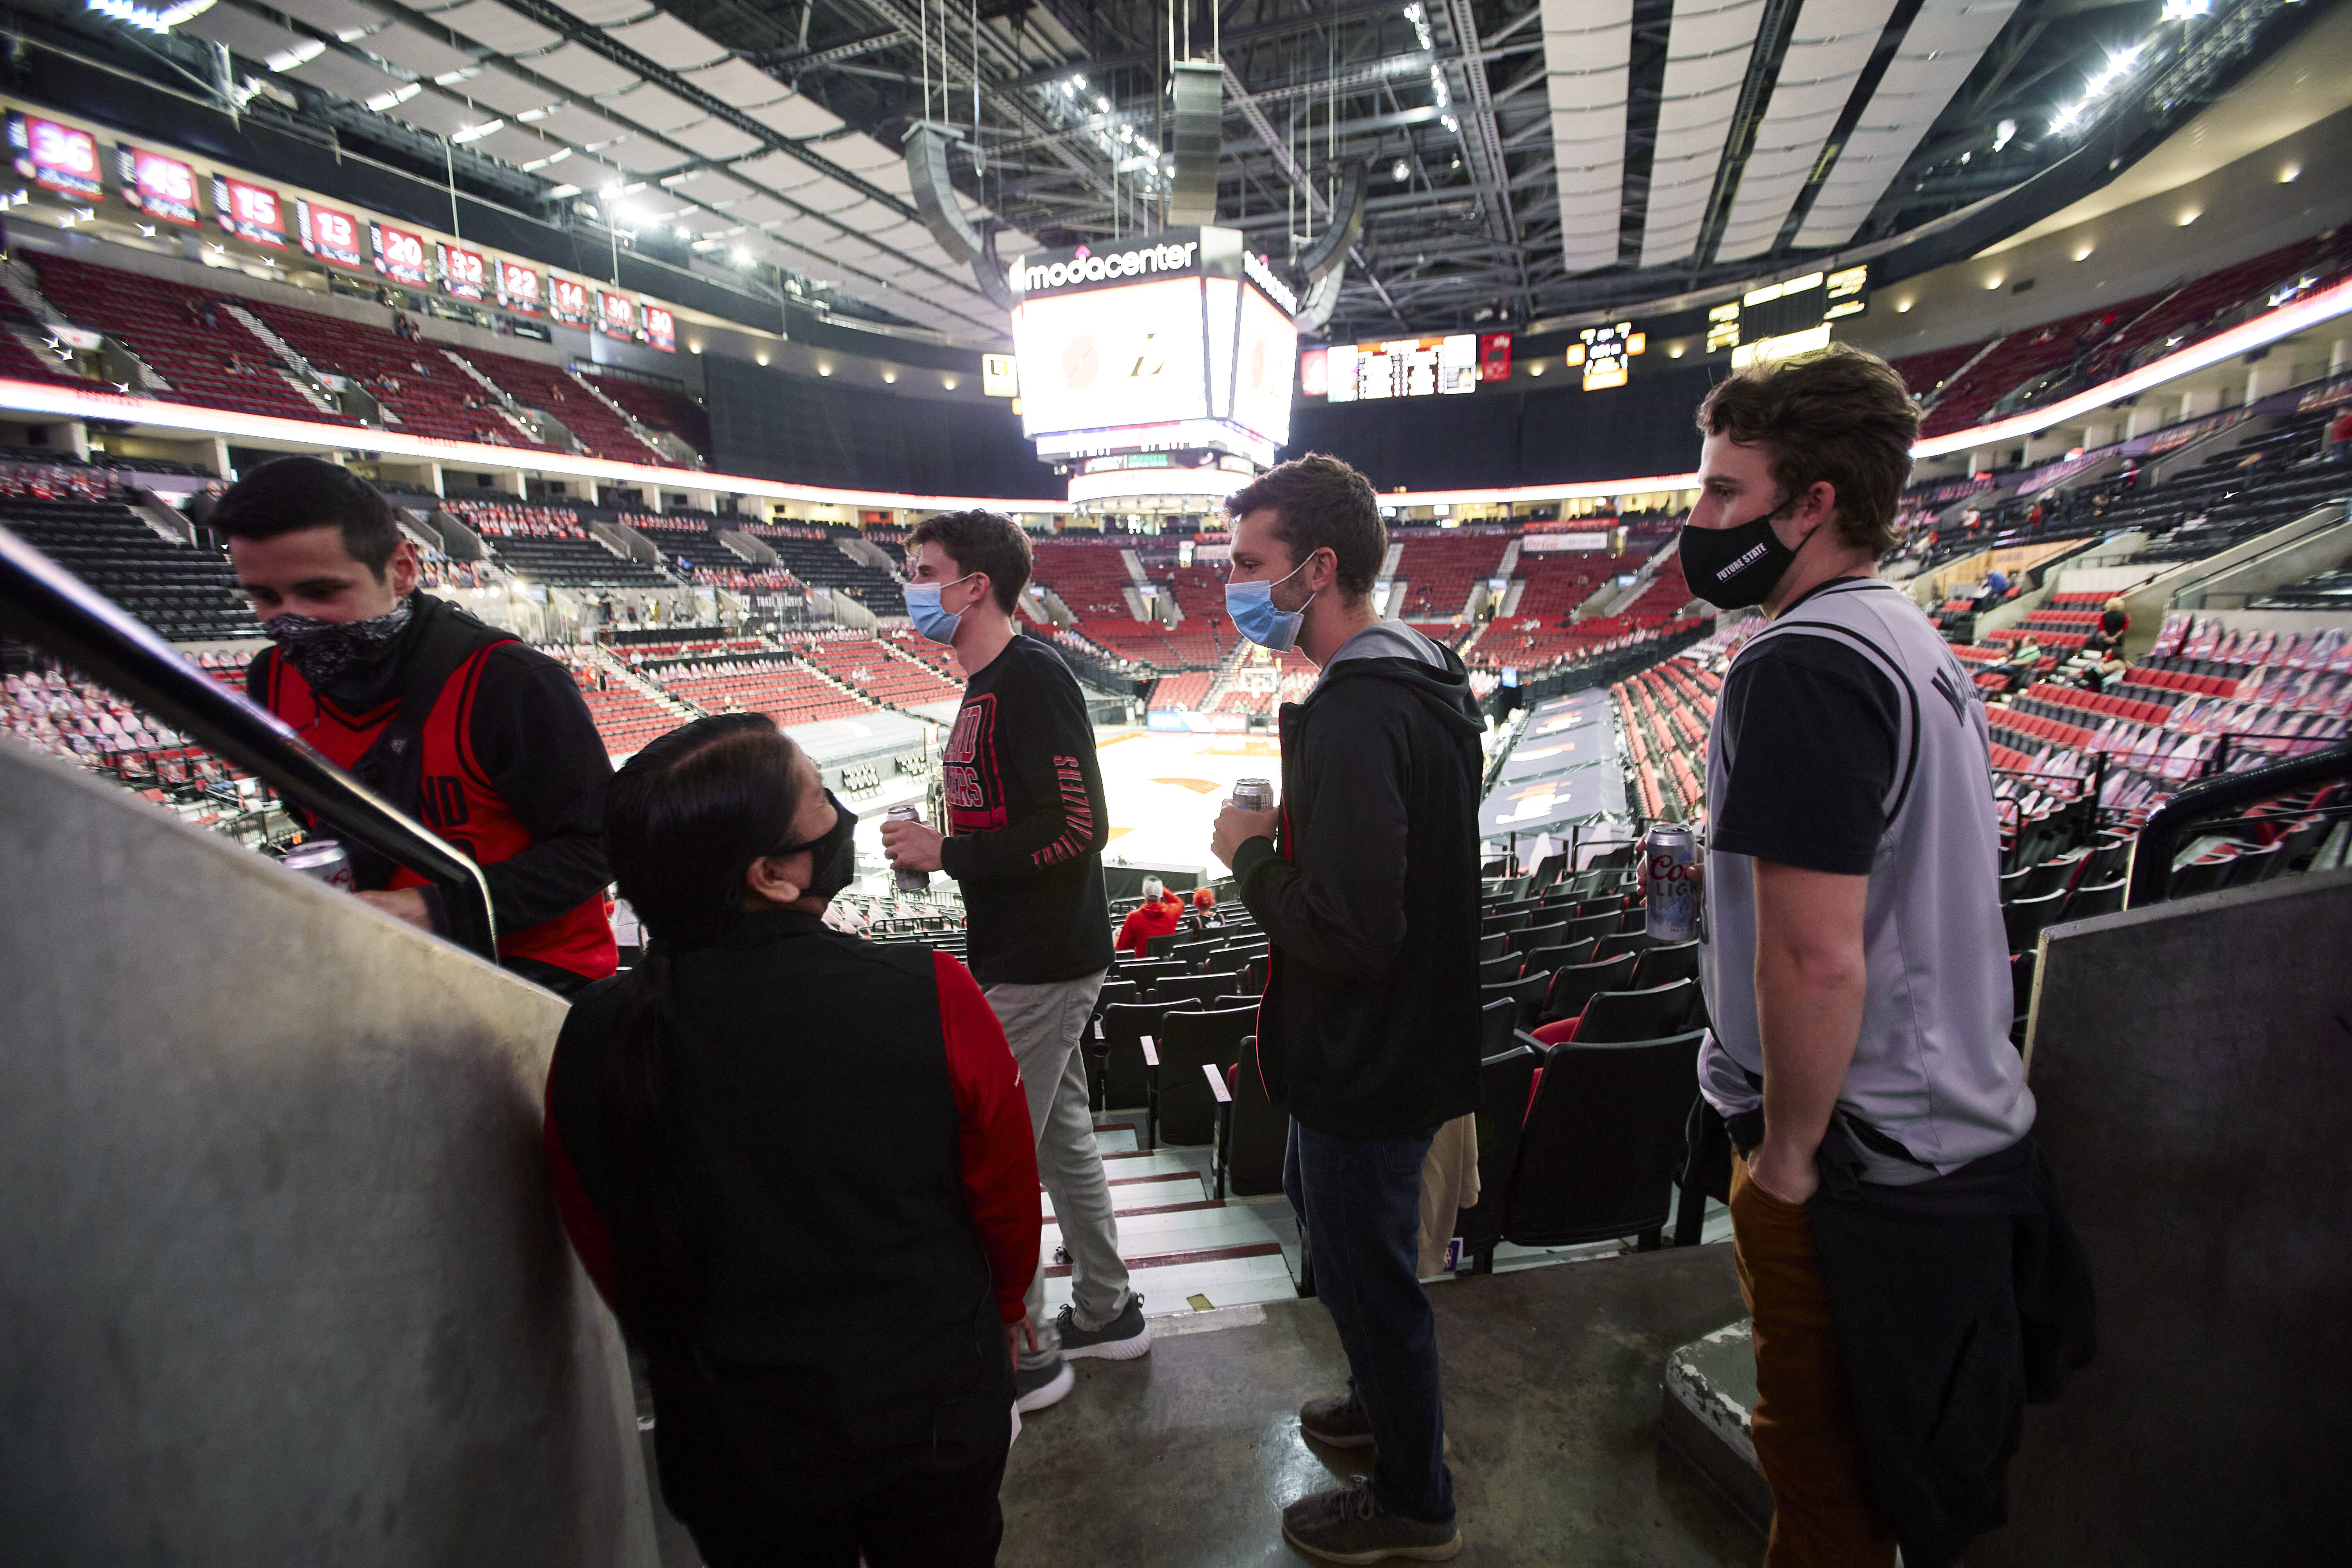 Moda Center to allow fans back at 10% capacity